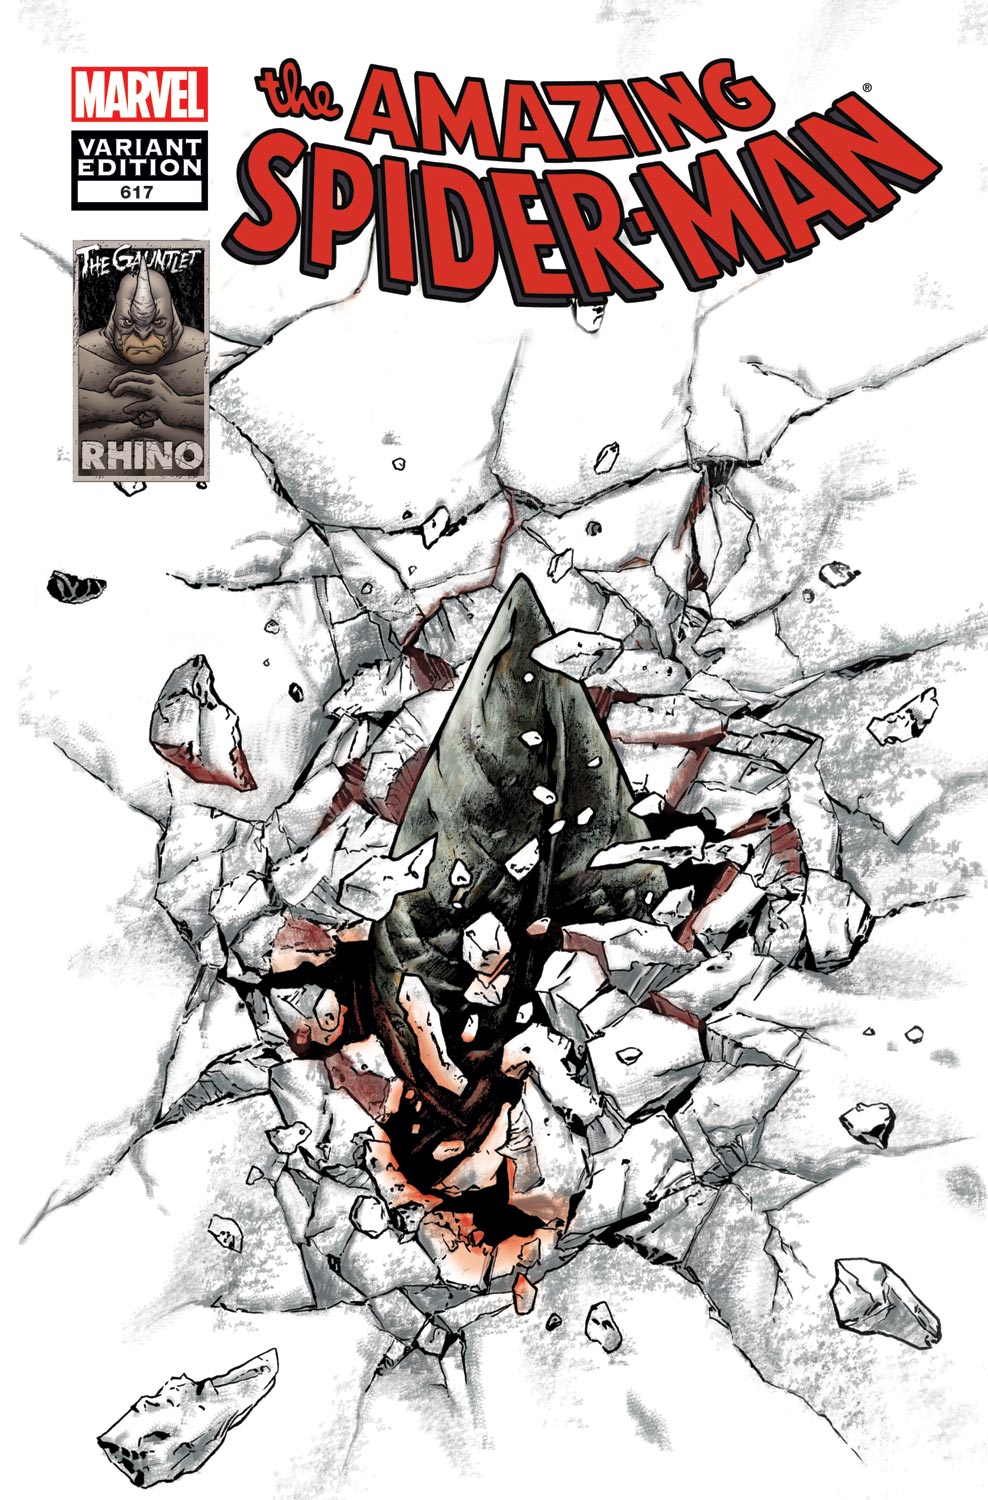 Amazing Spider-Man (1999) #617 (RHINO IS COMING VARIANT)